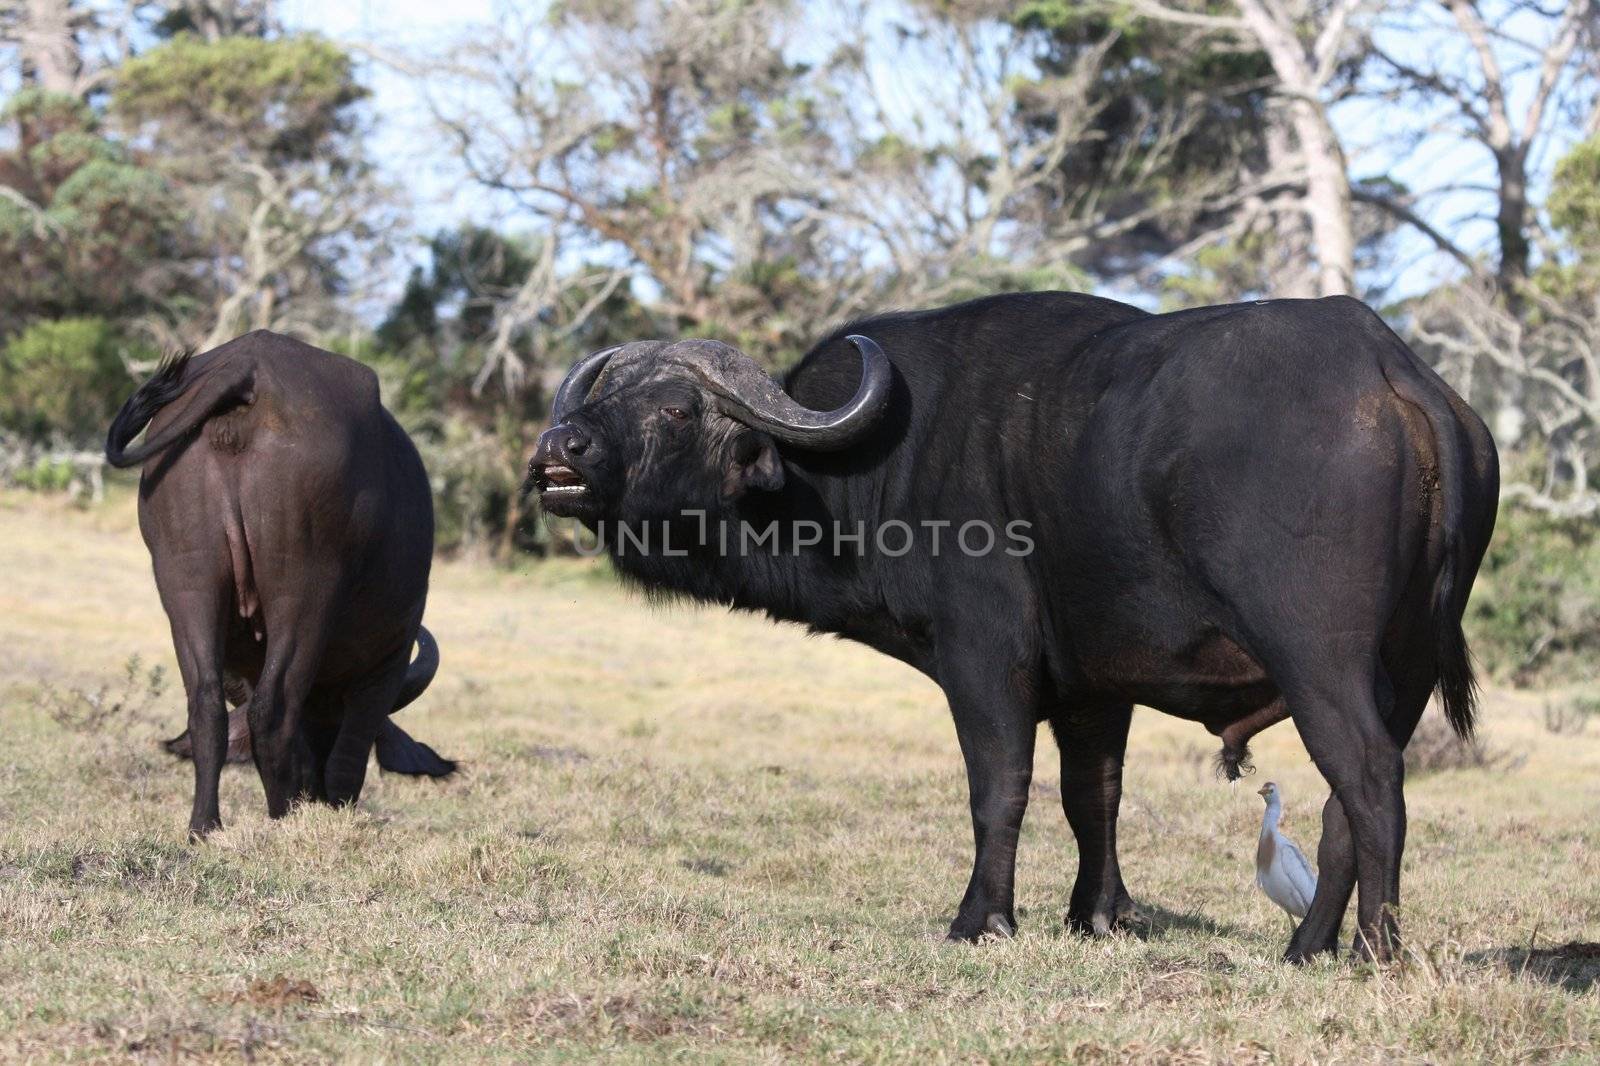 Big male buffalo scenting or showing flehmen response to mate with cow